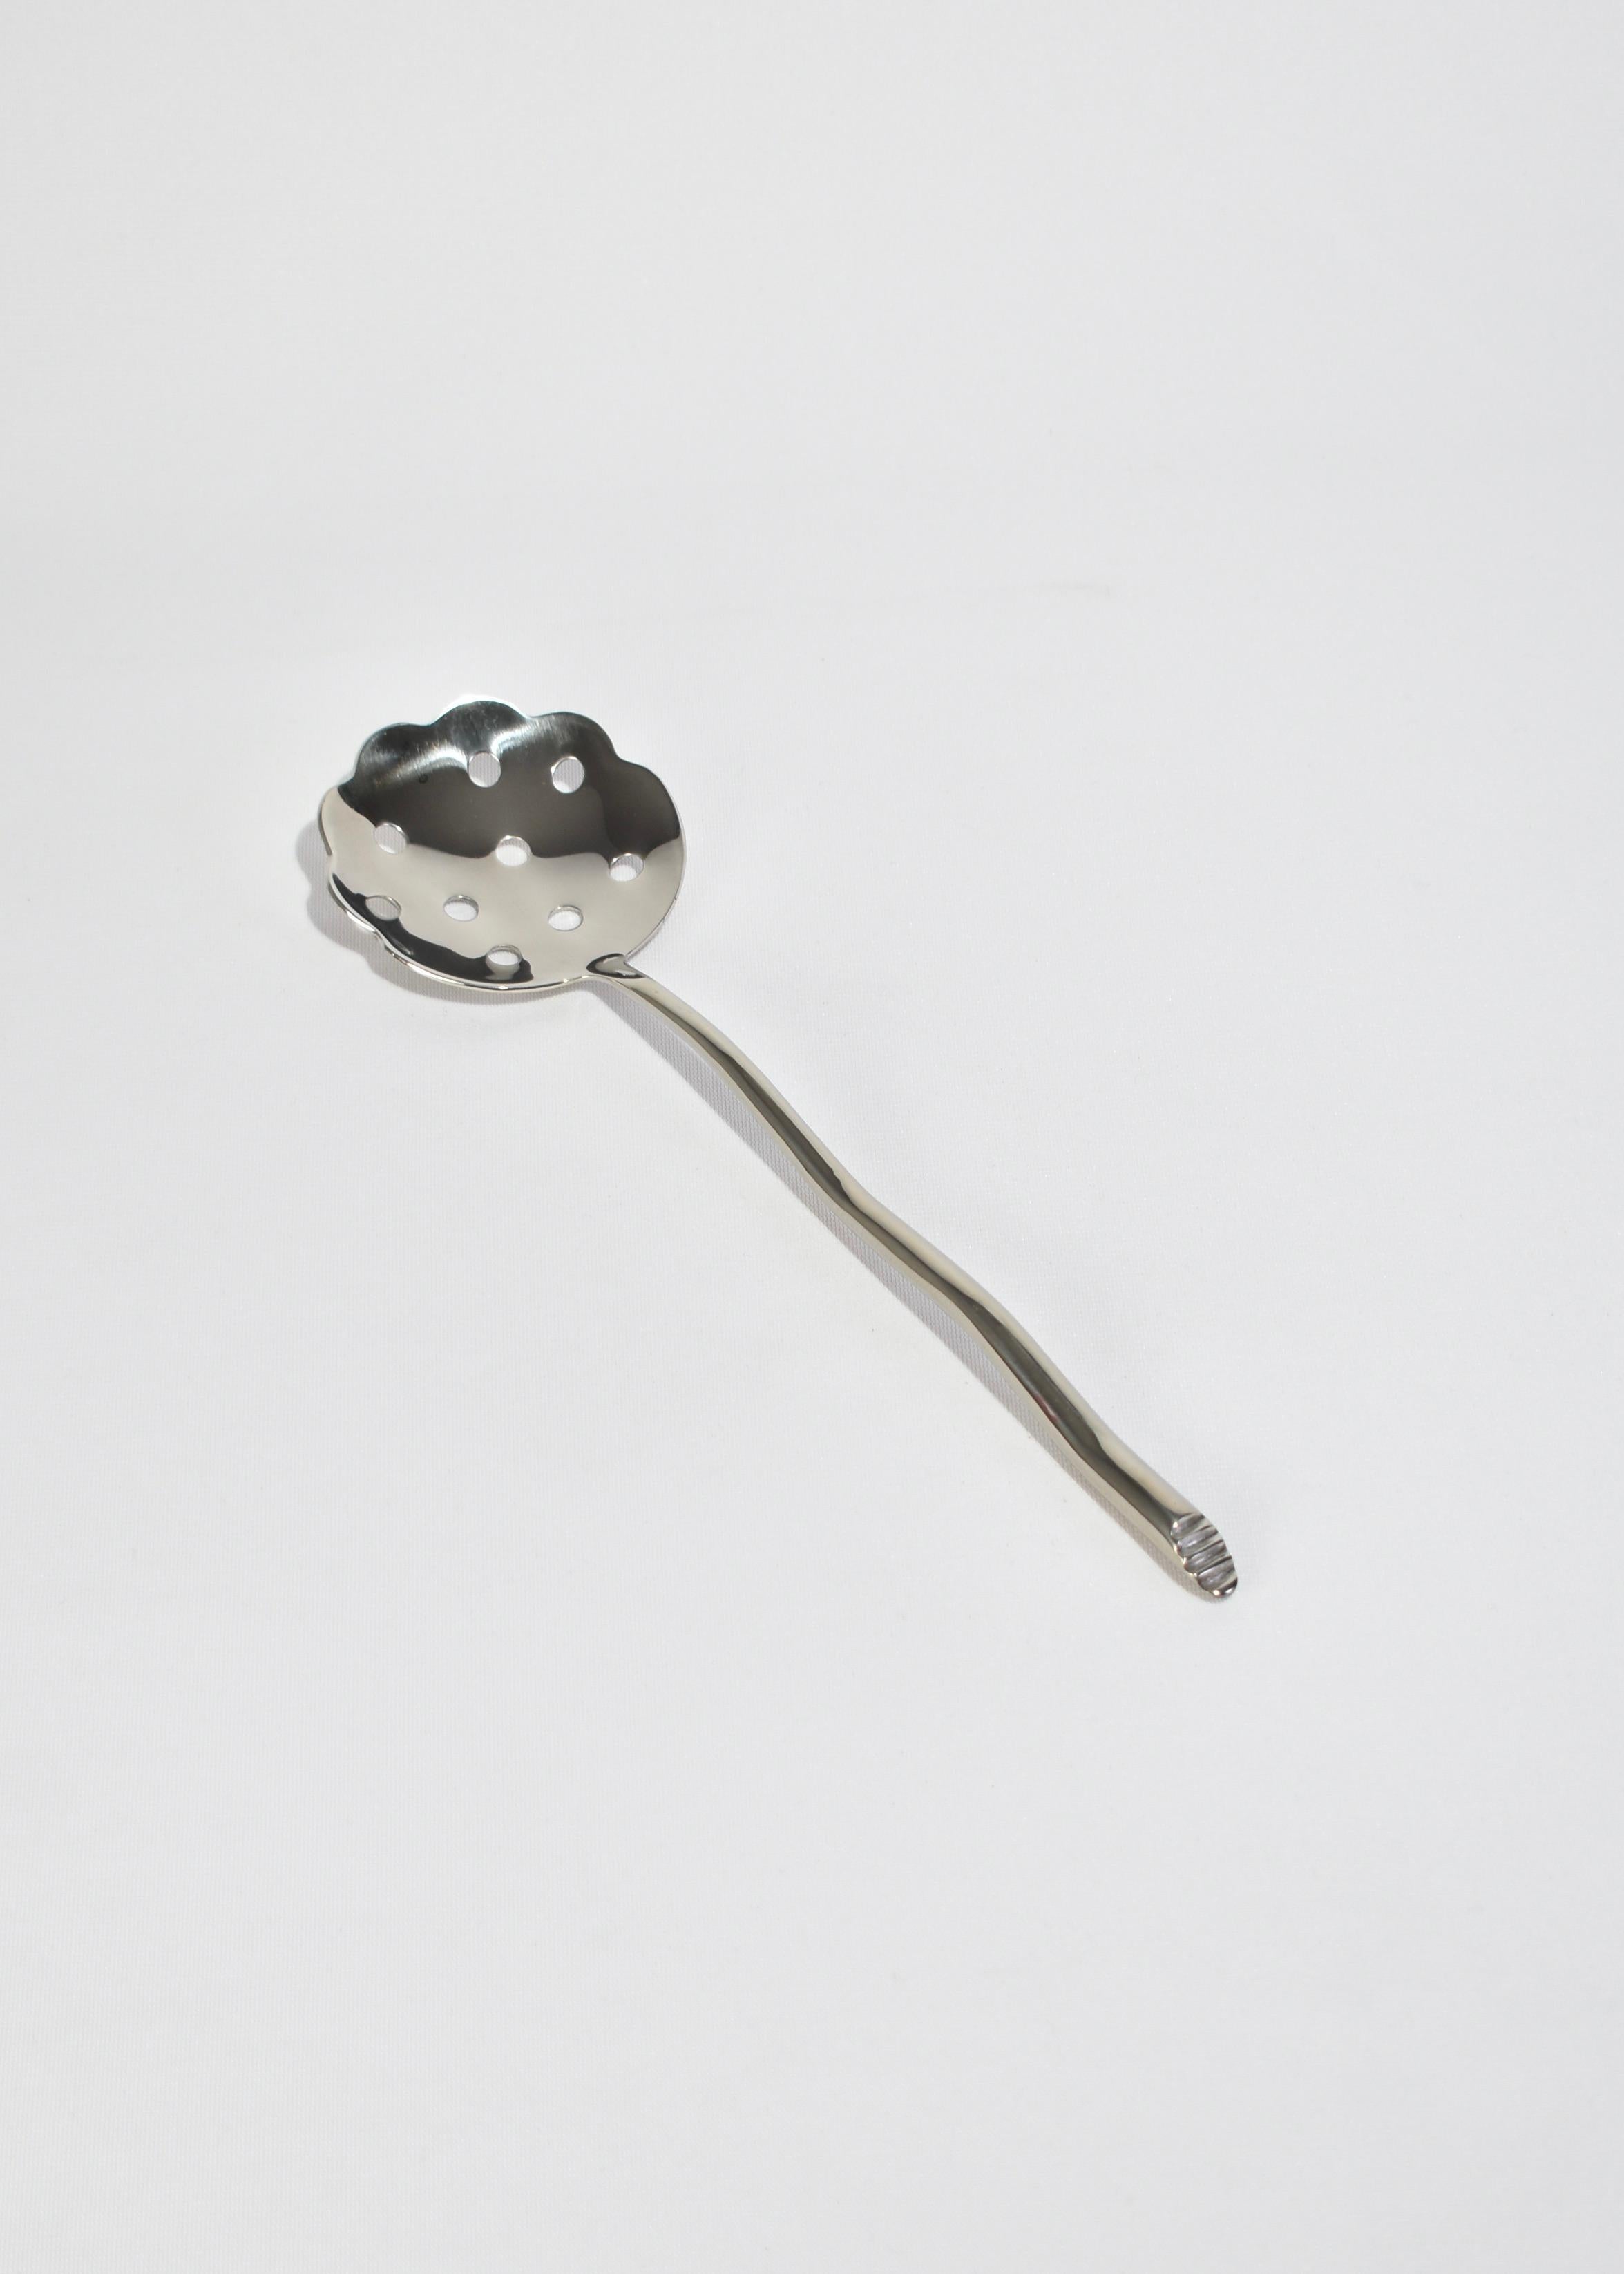 Stainless steel slotted serving spoon in 'Shore' pattern. Features an undulating handle with angled end. Impressed above knob on side of handle: 'IZABEL LAM'. 

Designed in the late 1980s by Izabel Lam, available exclusively.